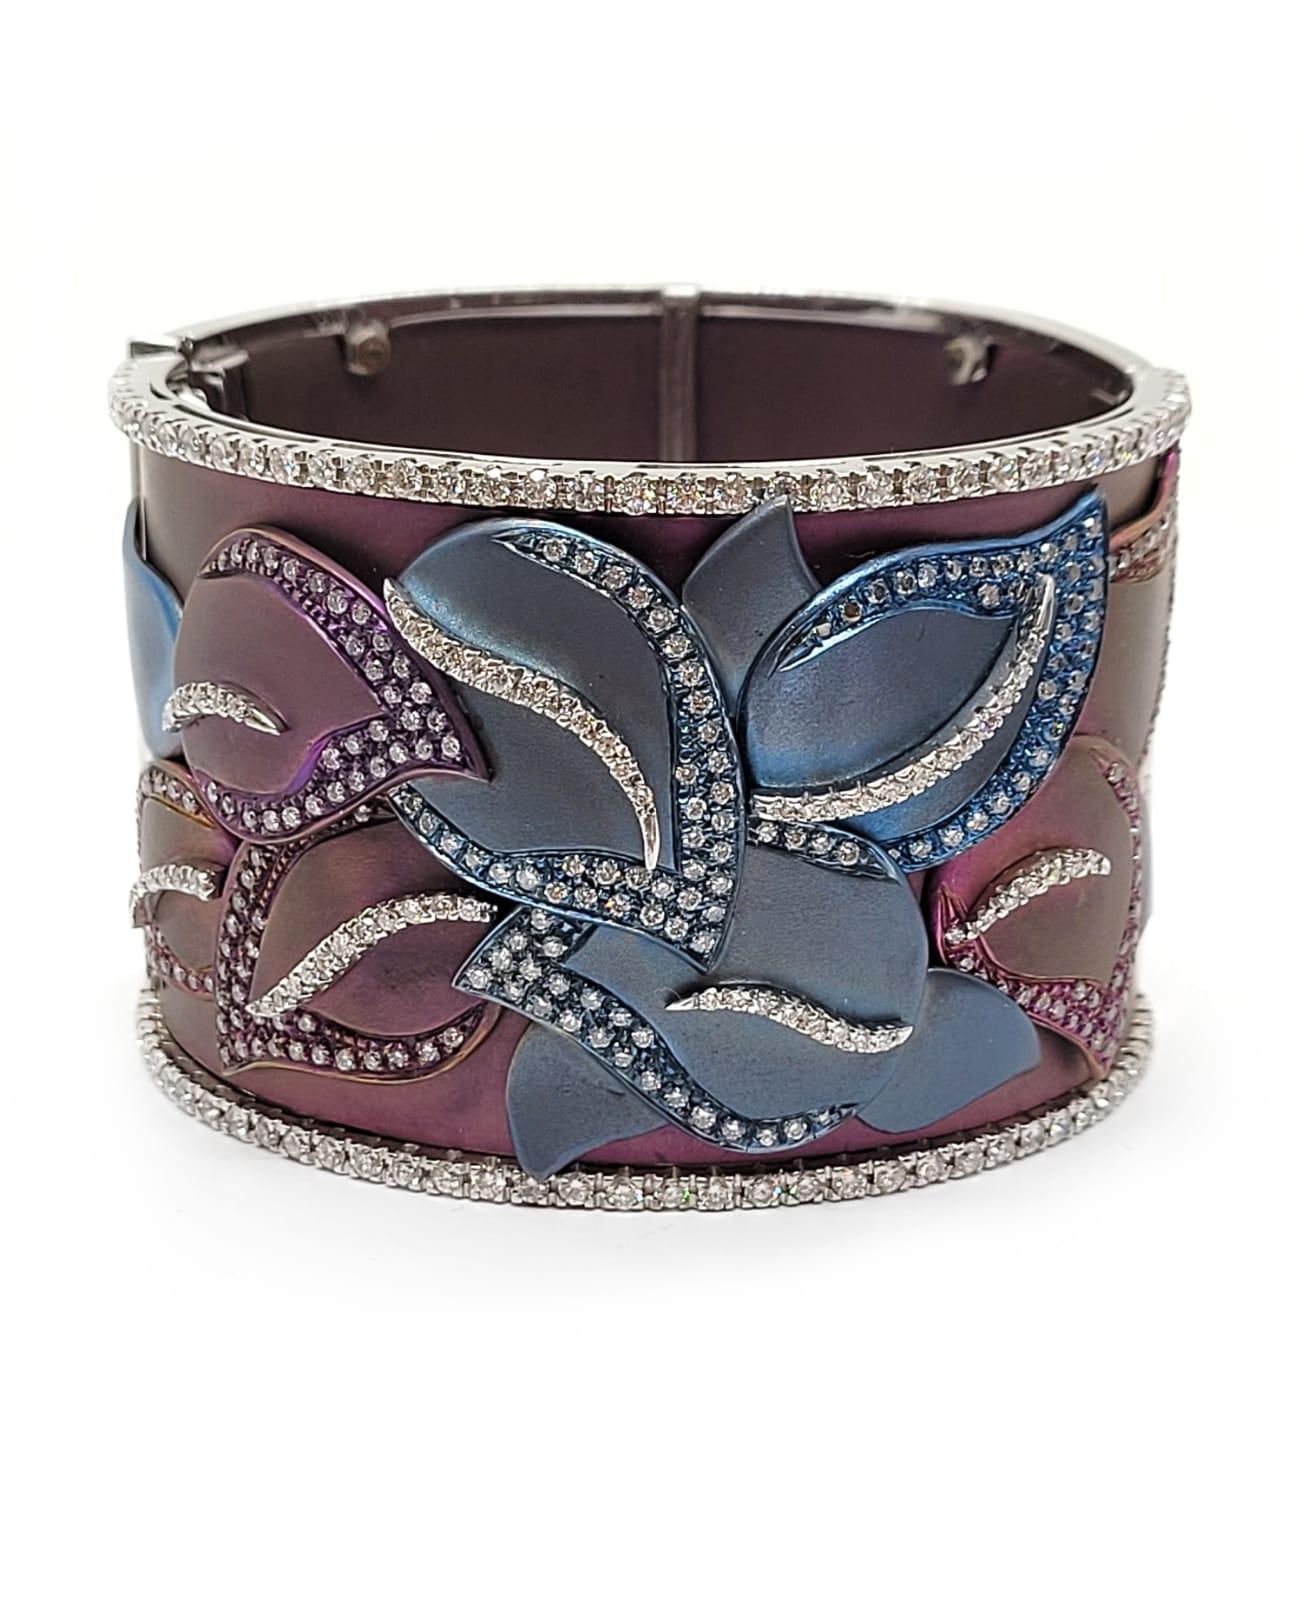 Flower Cuff Bracelet Diamond Titanium 18k Gold Andreoli

This Andreoli flower cuff bracelet features an elaborate and intricate artisanship titanium work with 5.46 carats of round brilliant cut diamonds. Set with 63.30g of 18K White Gold and